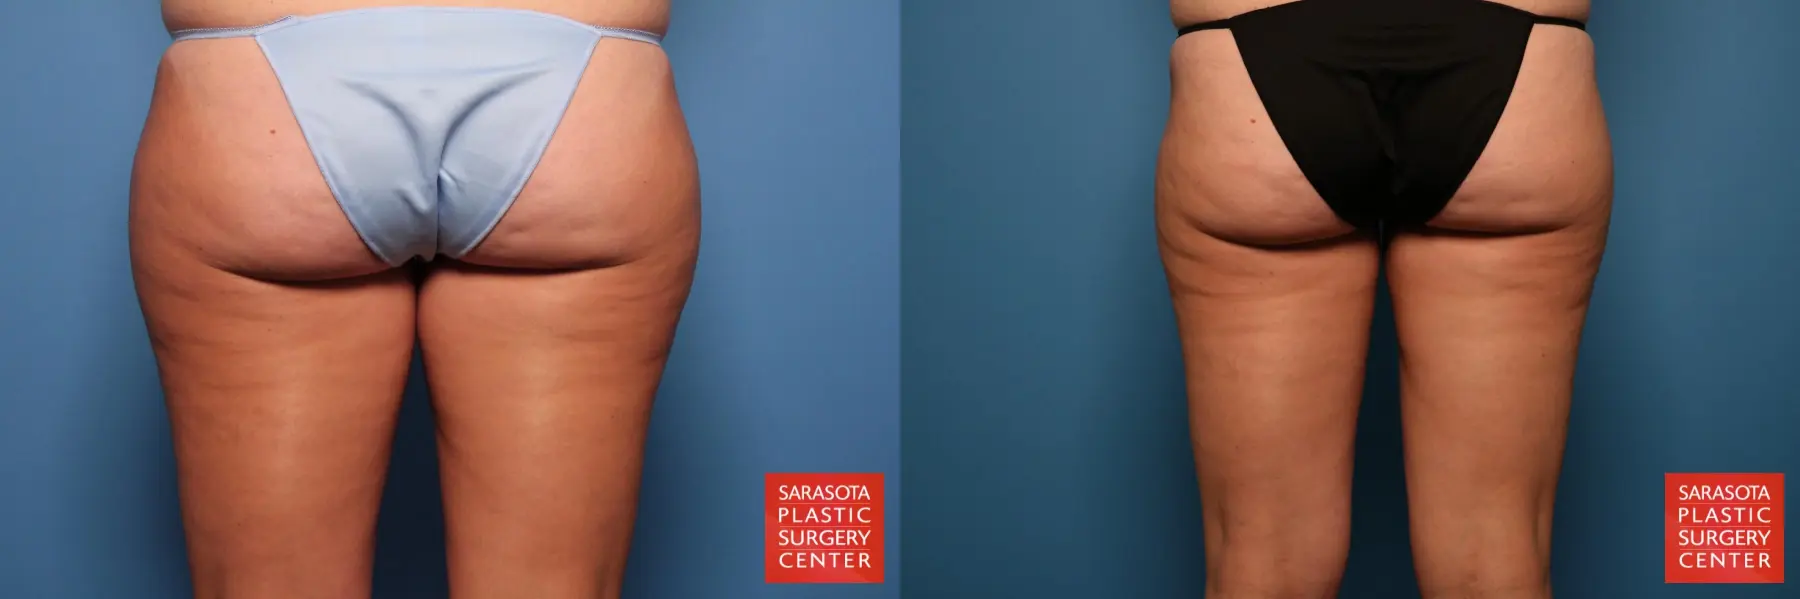 Liposuction: Patient 4 - Before and After 5